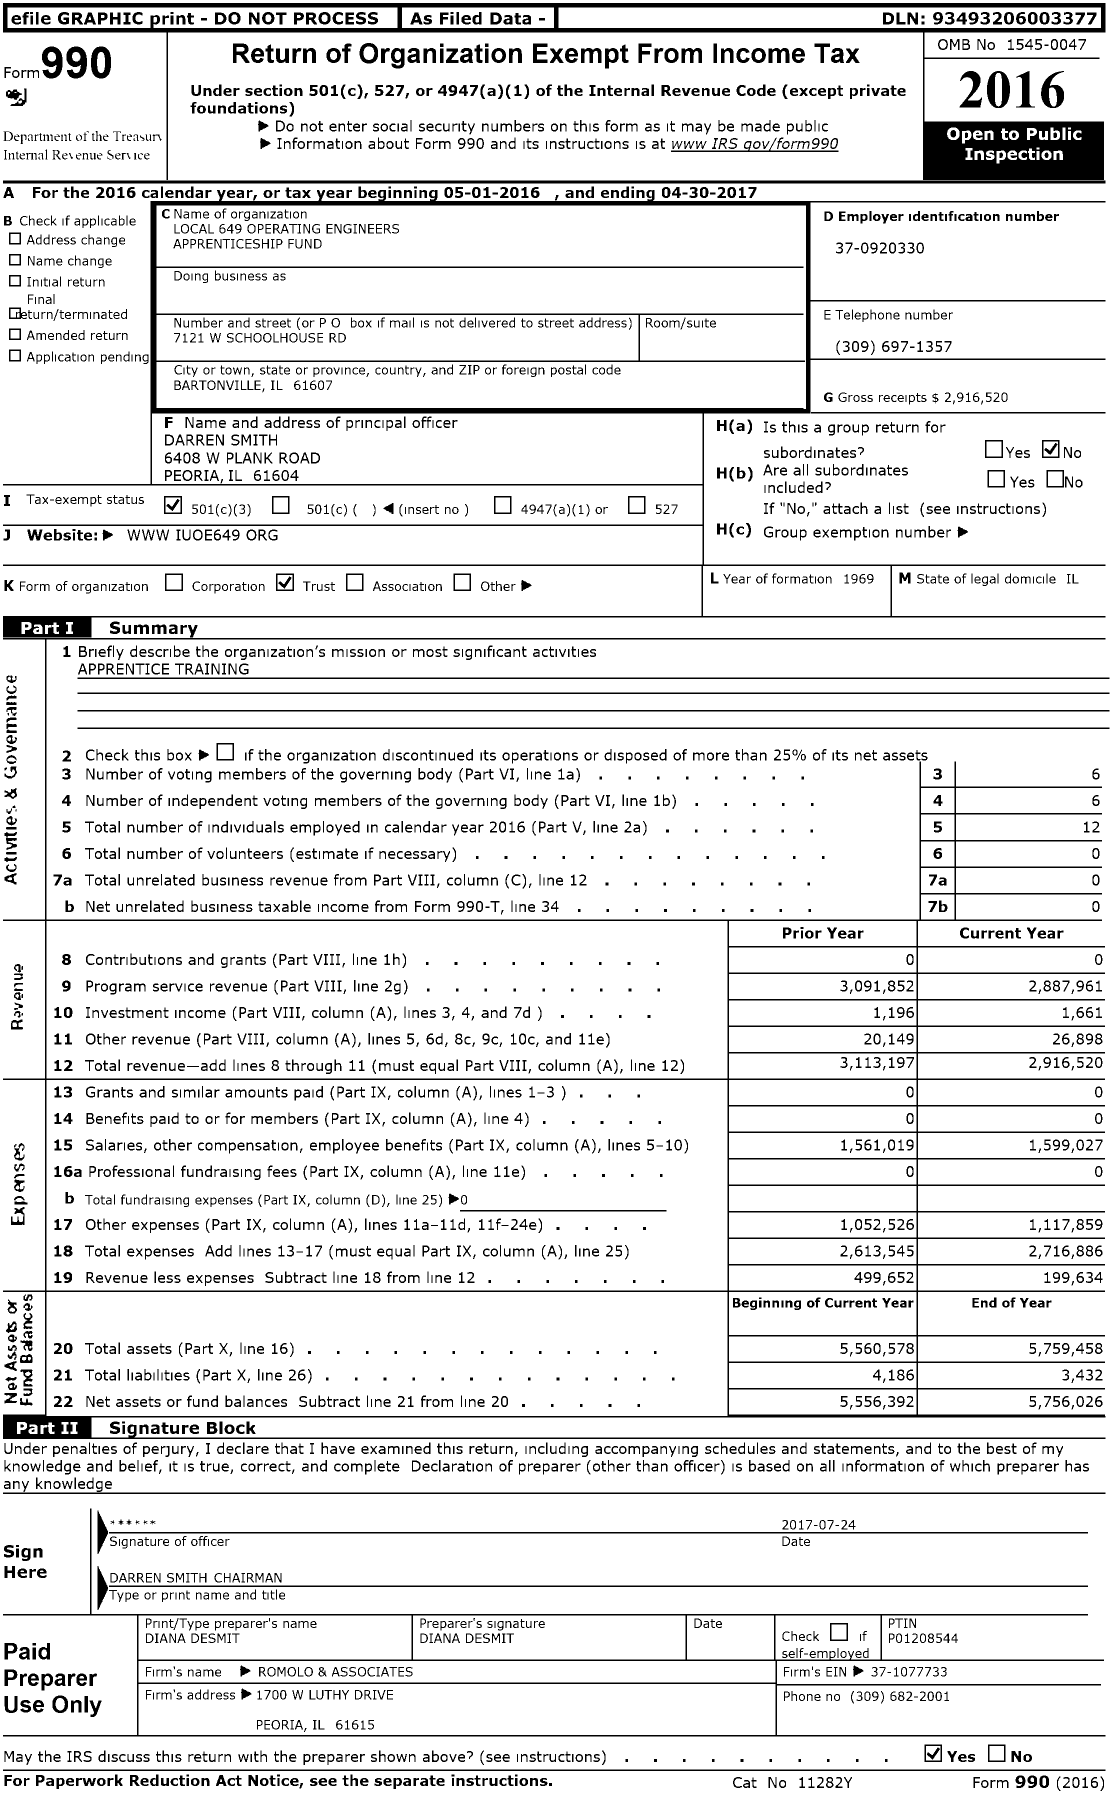 Image of first page of 2016 Form 990 for Local 649 Operating Engineers Apprenticeship Fund